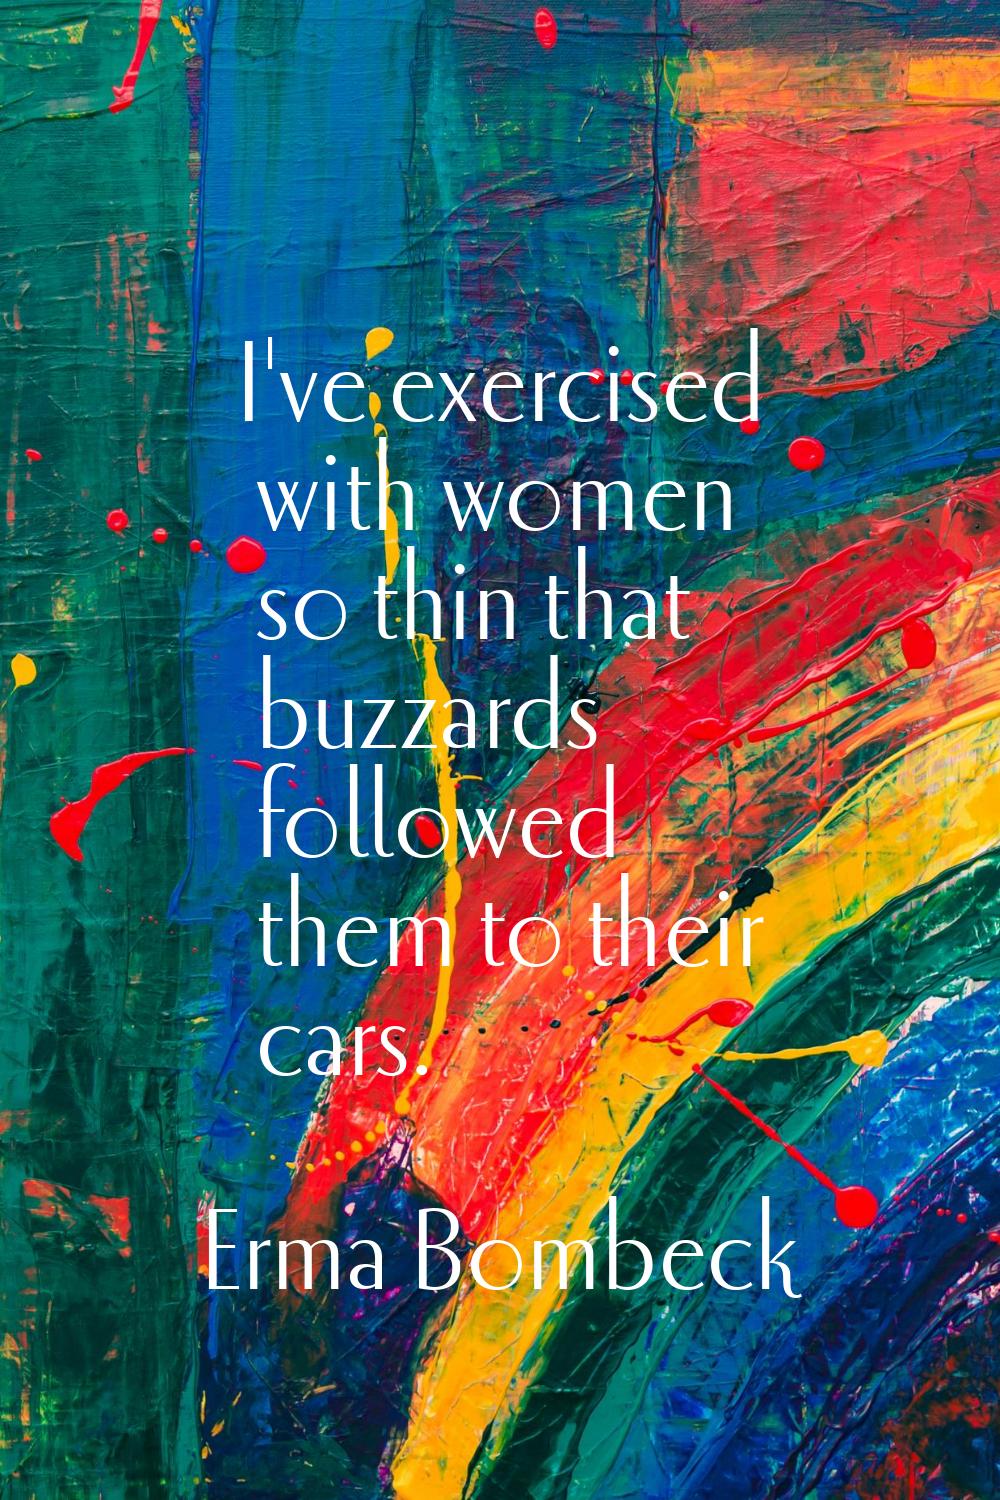 I've exercised with women so thin that buzzards followed them to their cars.